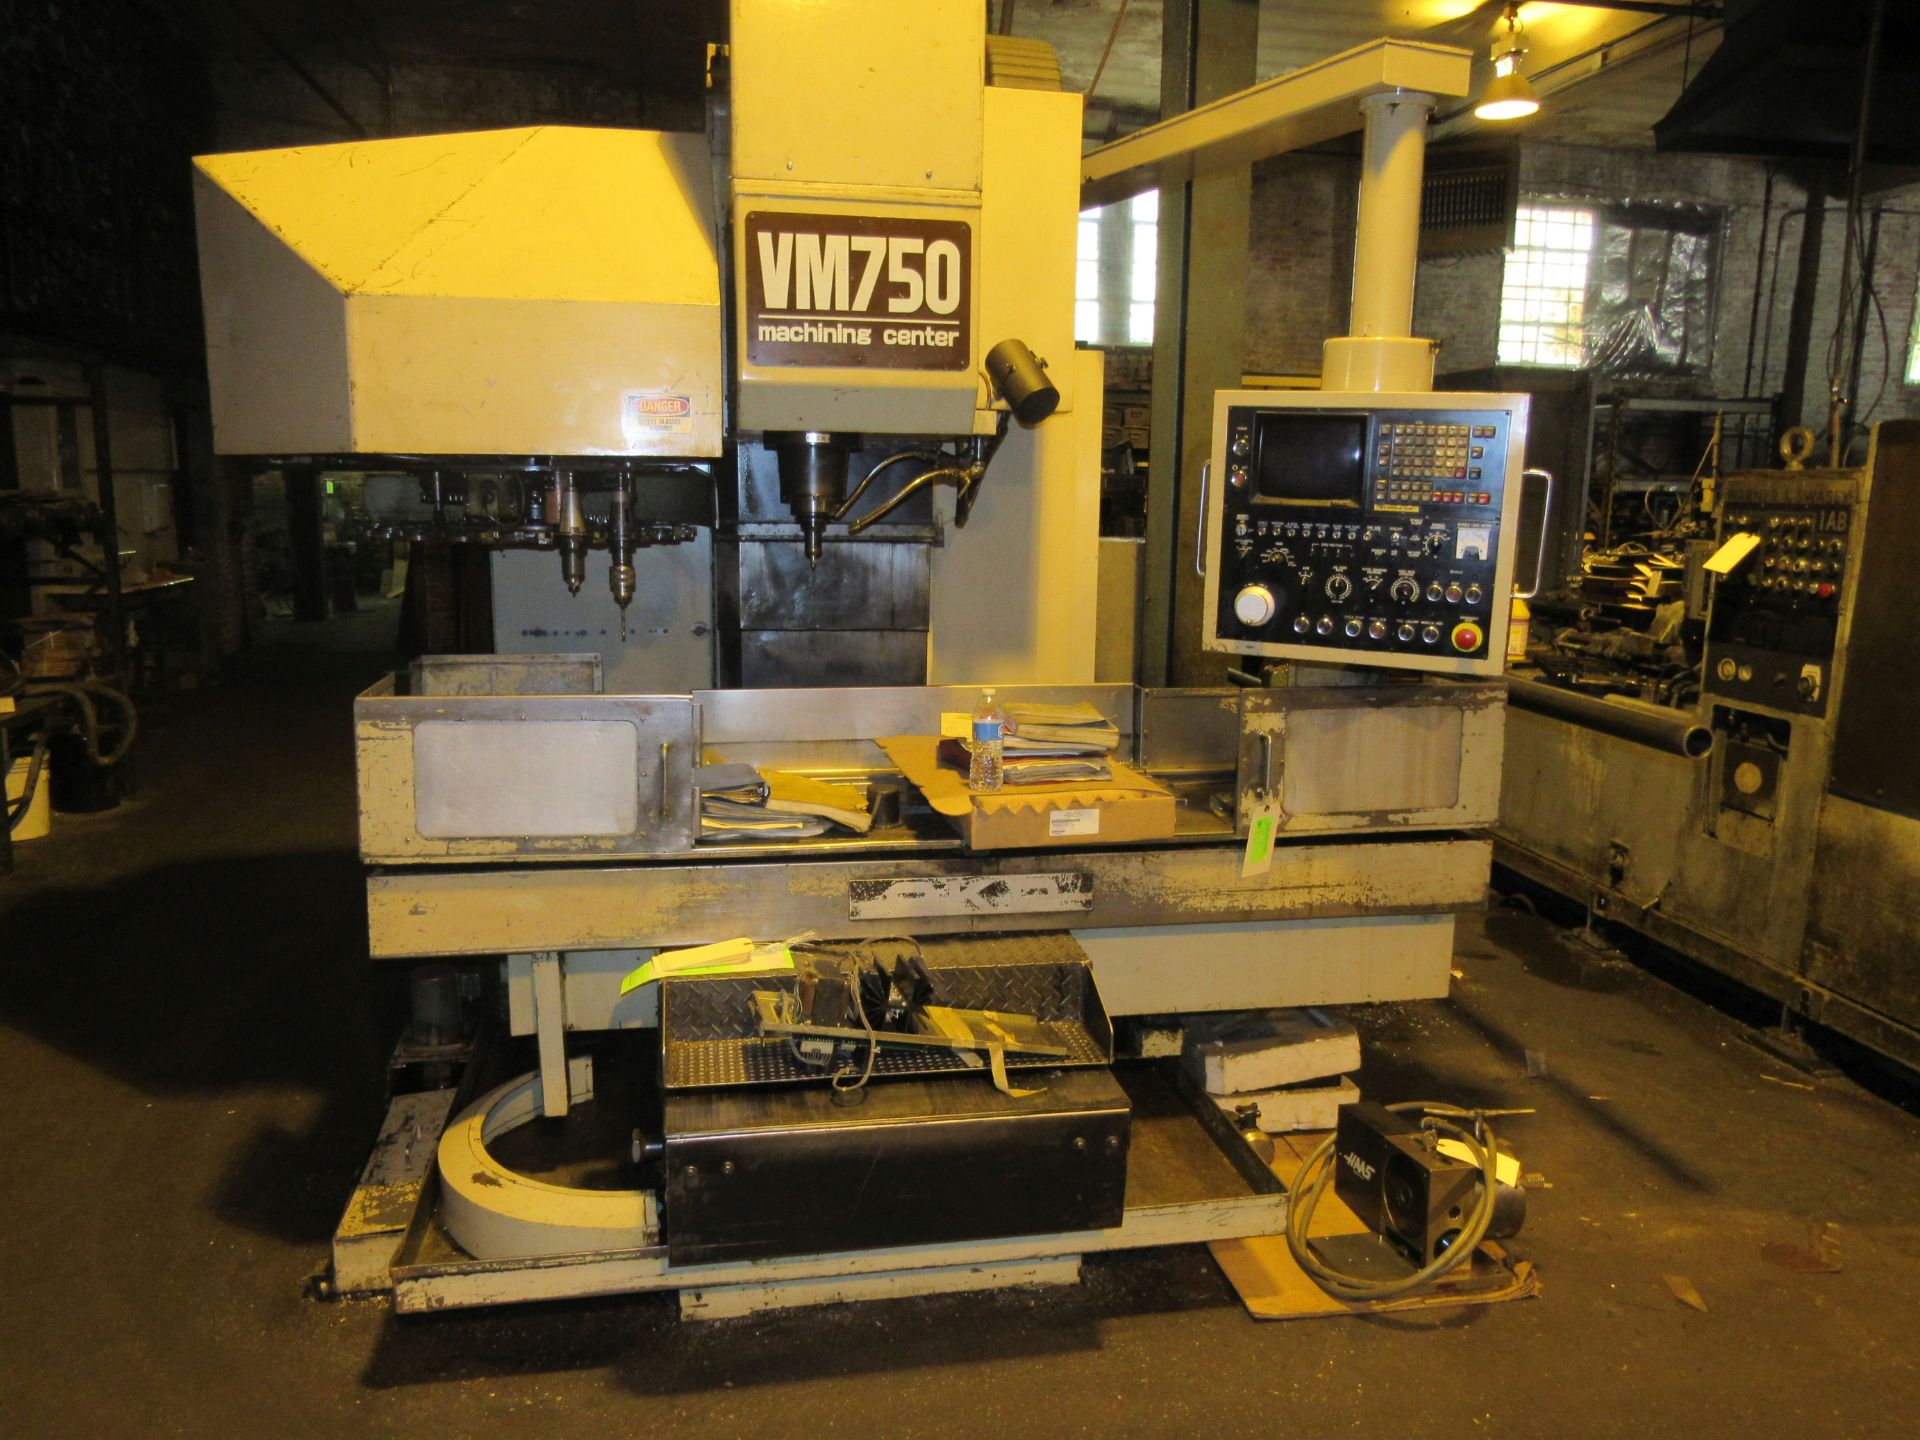 Tominaga model VM750CNC vertical machining center, serial #OUO1000,